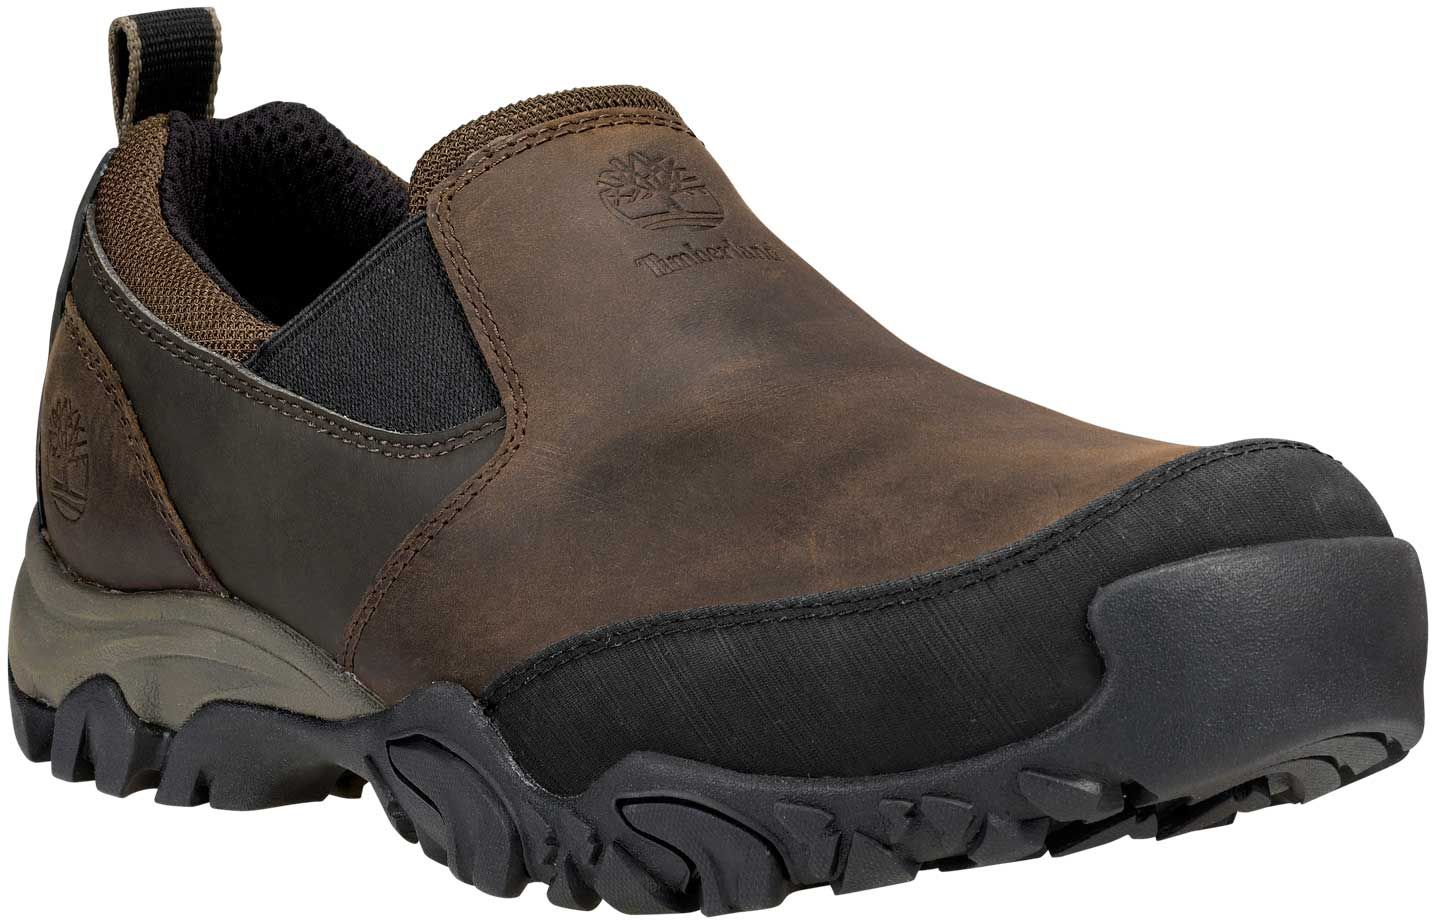 Timberland Men's Mt. Abram Slip-On Casual Shoes | DICK'S Sporting Goods